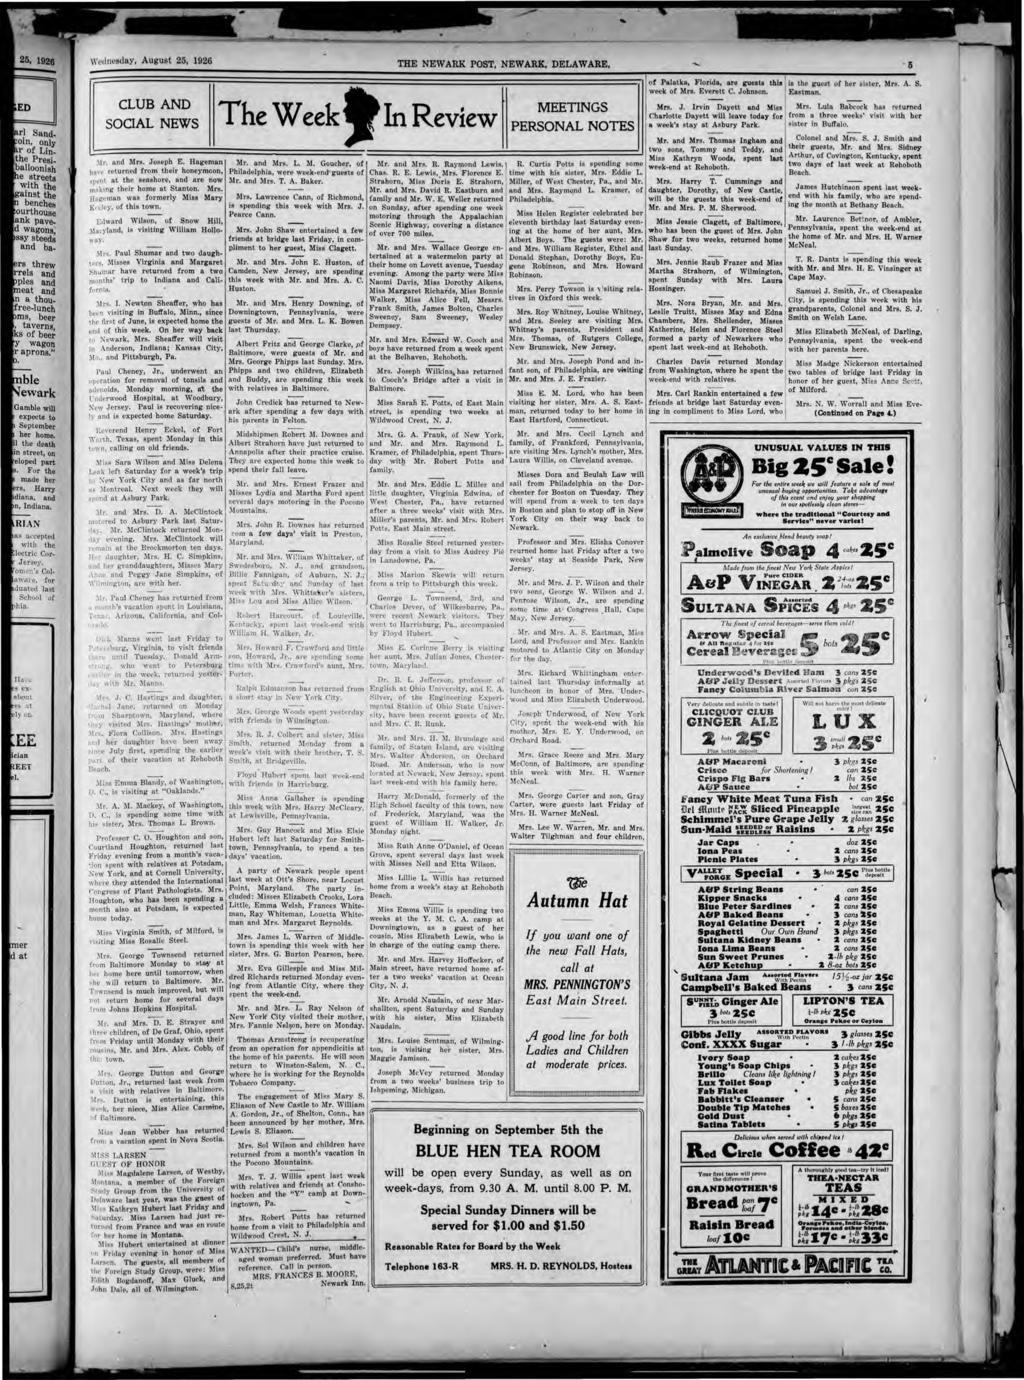 \' dnesday, August 25, 1926 THE NEW ARK POST. NEW ARK. DELAWARE. CLUB AND SOCAL NEWS :111'. and Mrs. Joseph E. Hageman h8\' returned from.